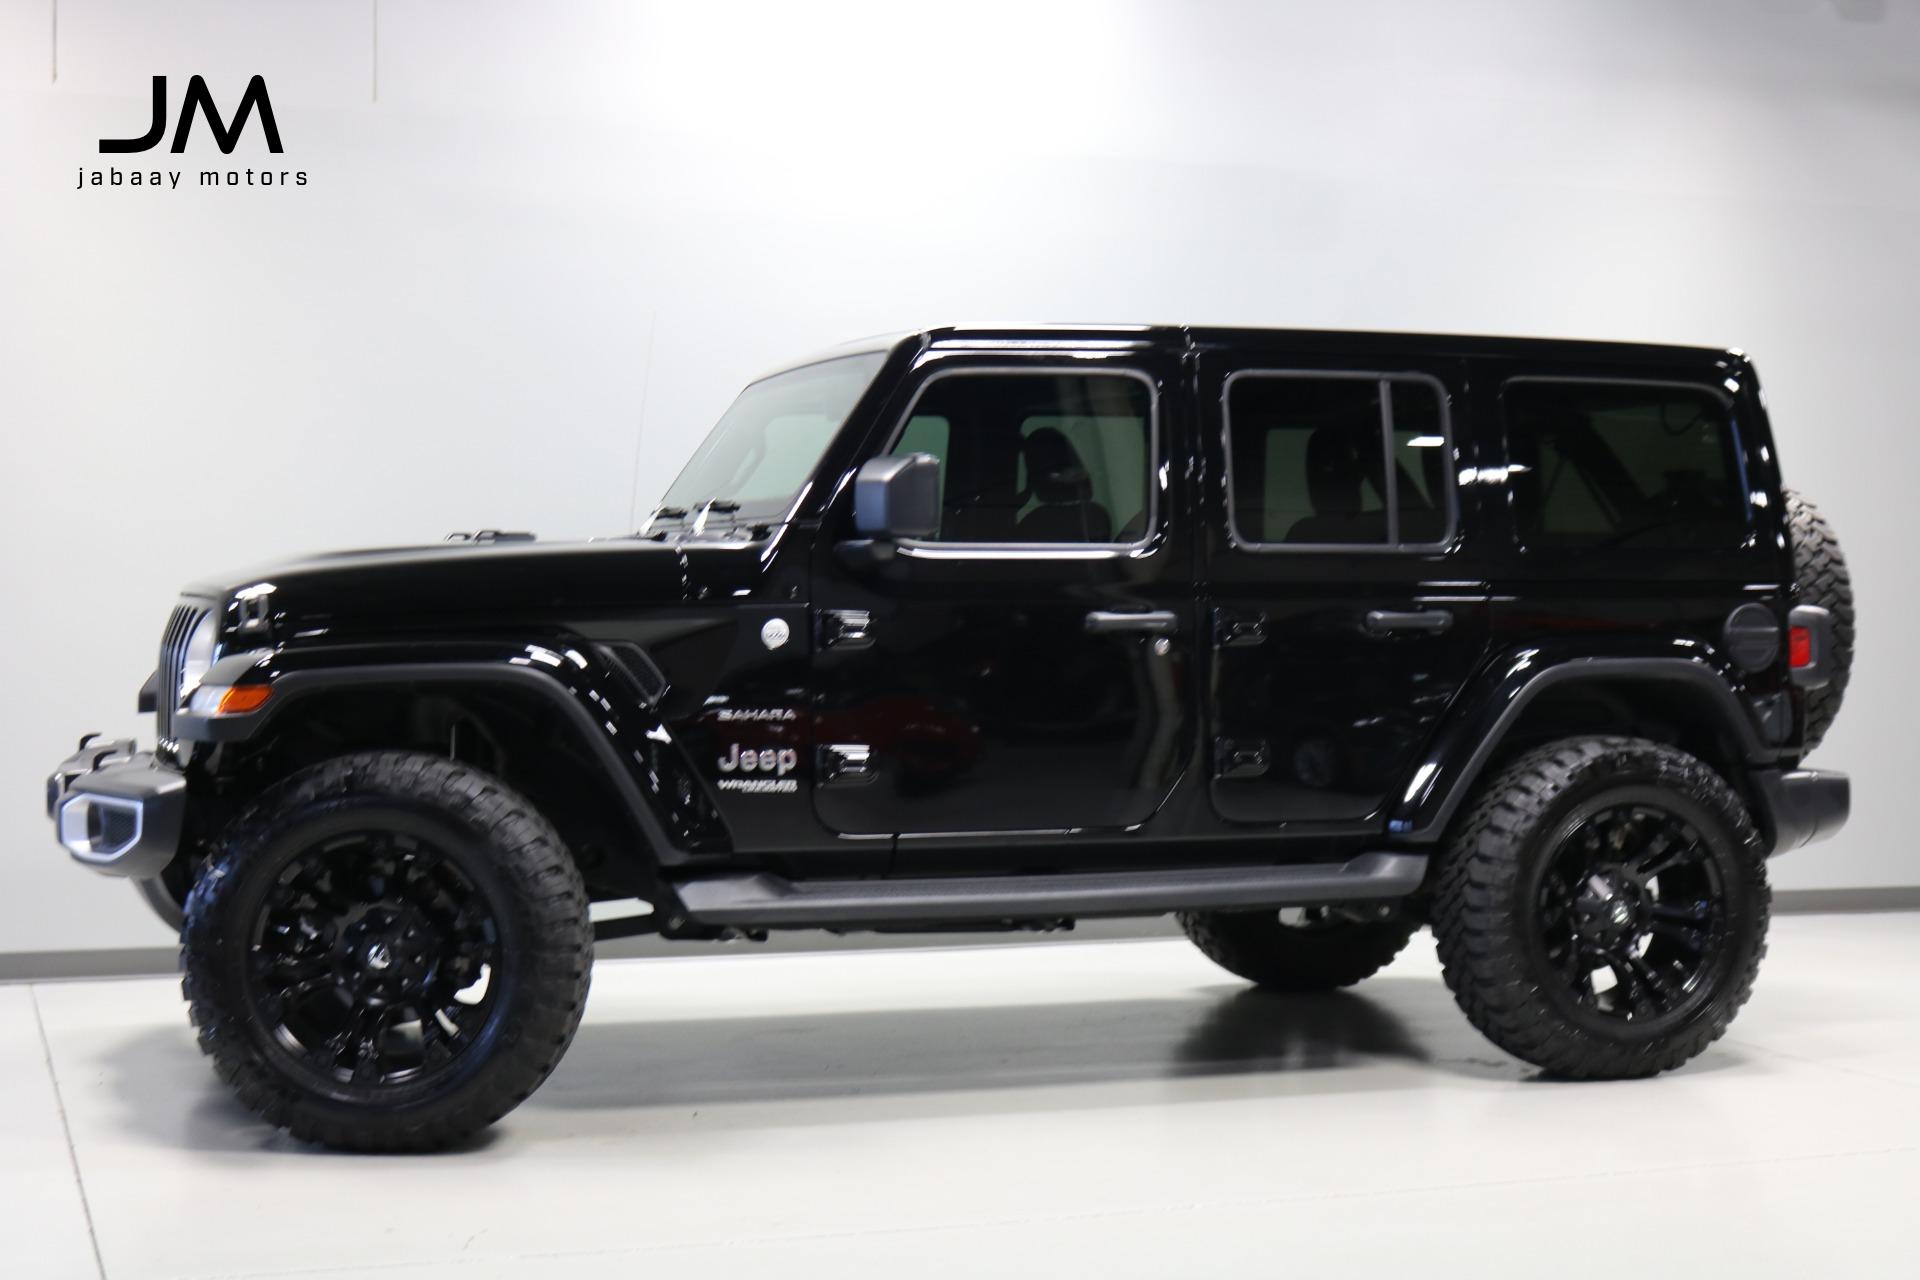 used-2020-jeep-wrangler-unlimited-sahara-for-sale-sold-jabaay